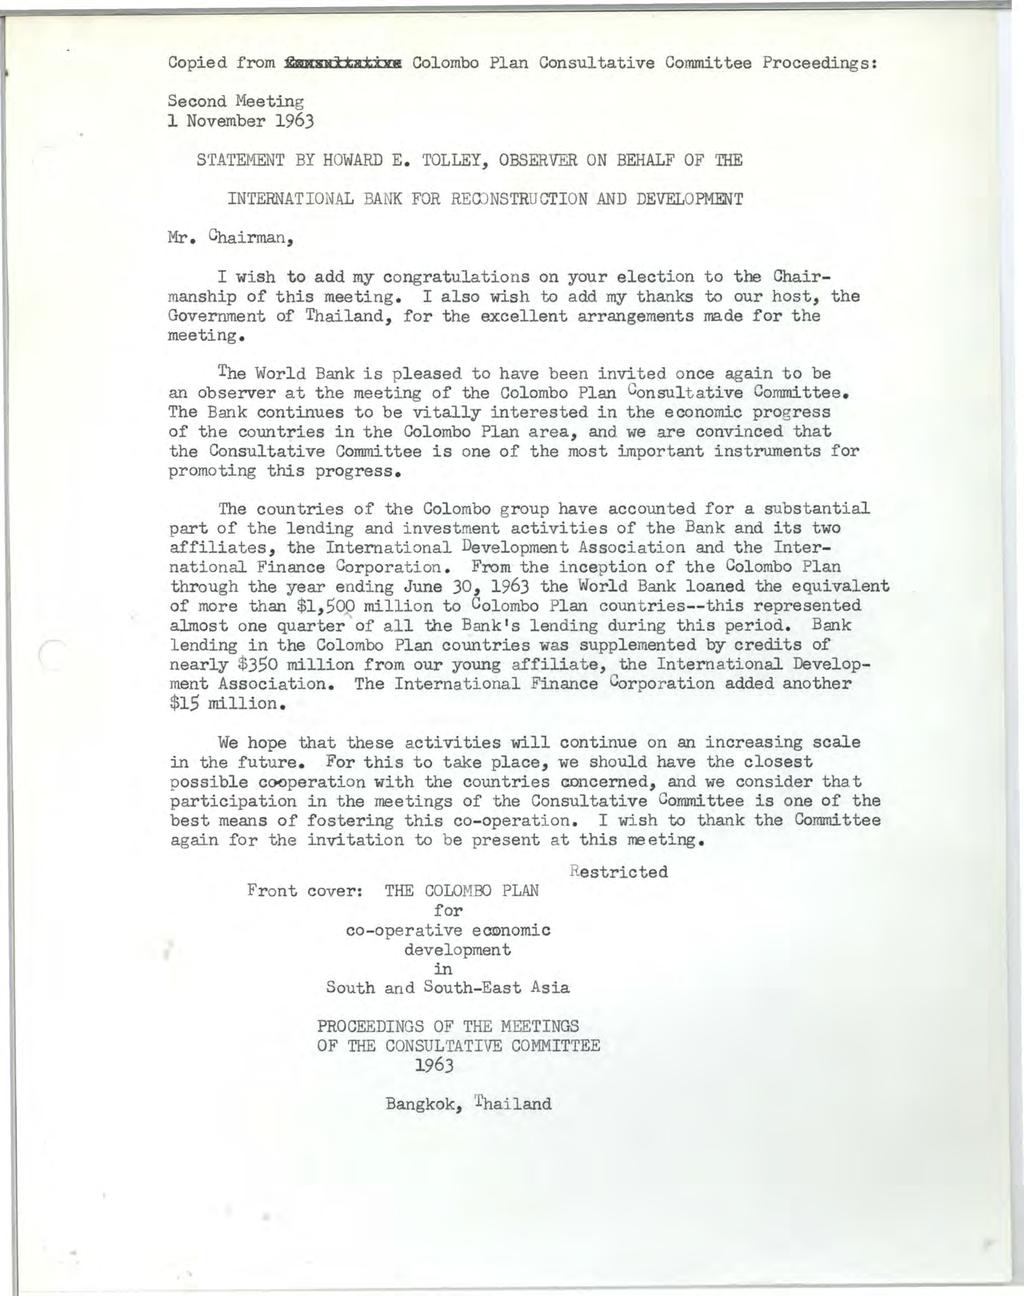 Copied from ~ltat,ive Colombo Plan Consultative Committee Proceedings: Second Meeting 1 November 1963 STATEMENT BY HOWARD E.